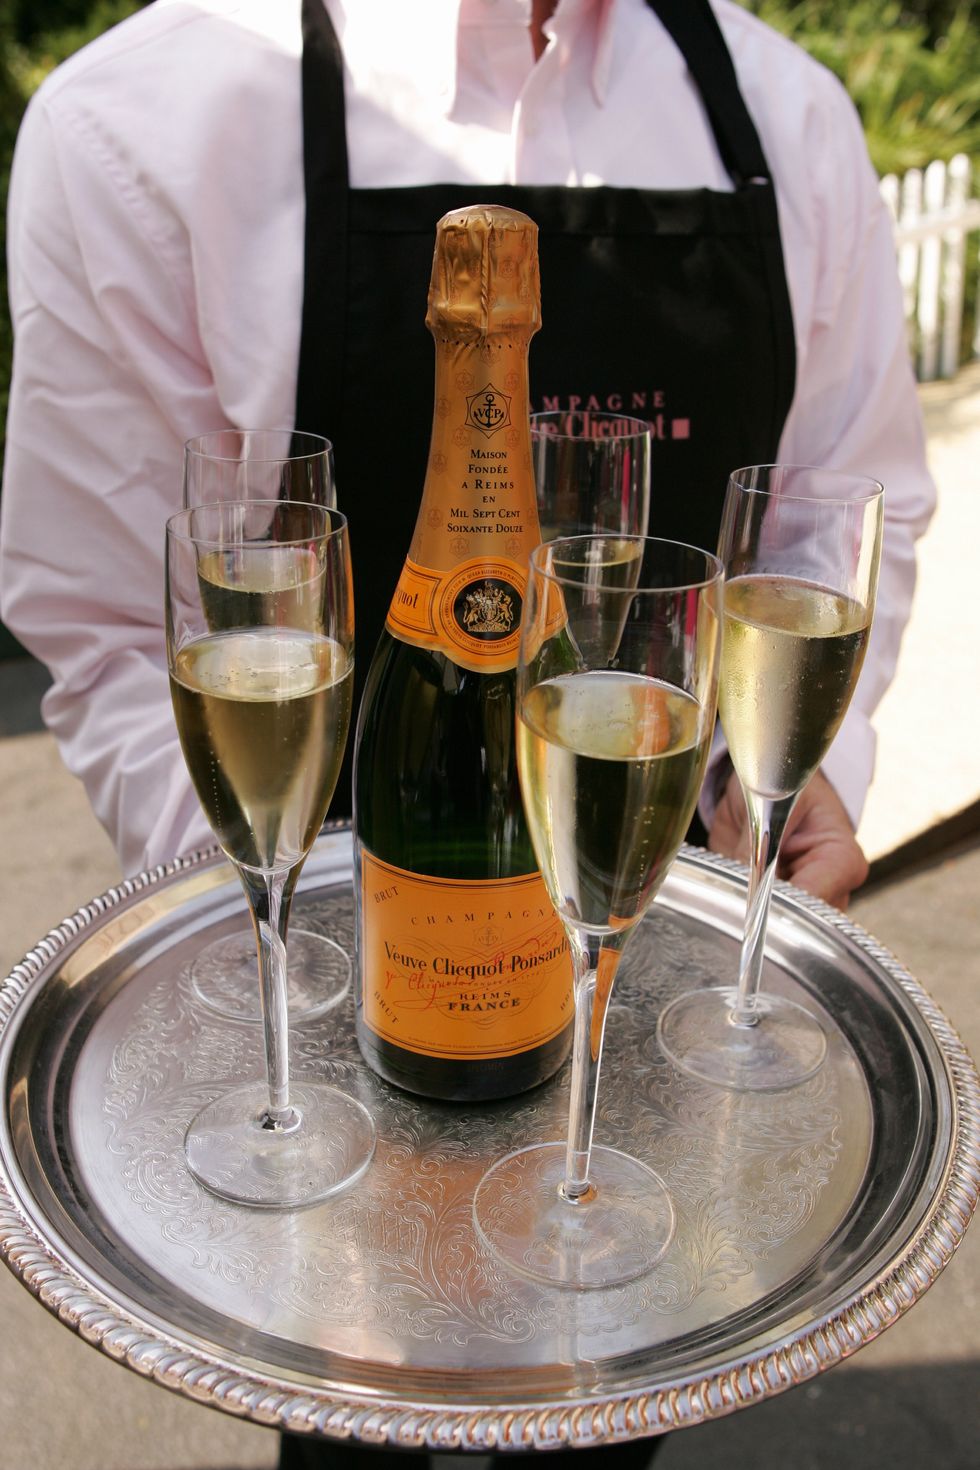 Veuve Clicquot Rich Champagne - The Champagne Cocktail you cannot miss.